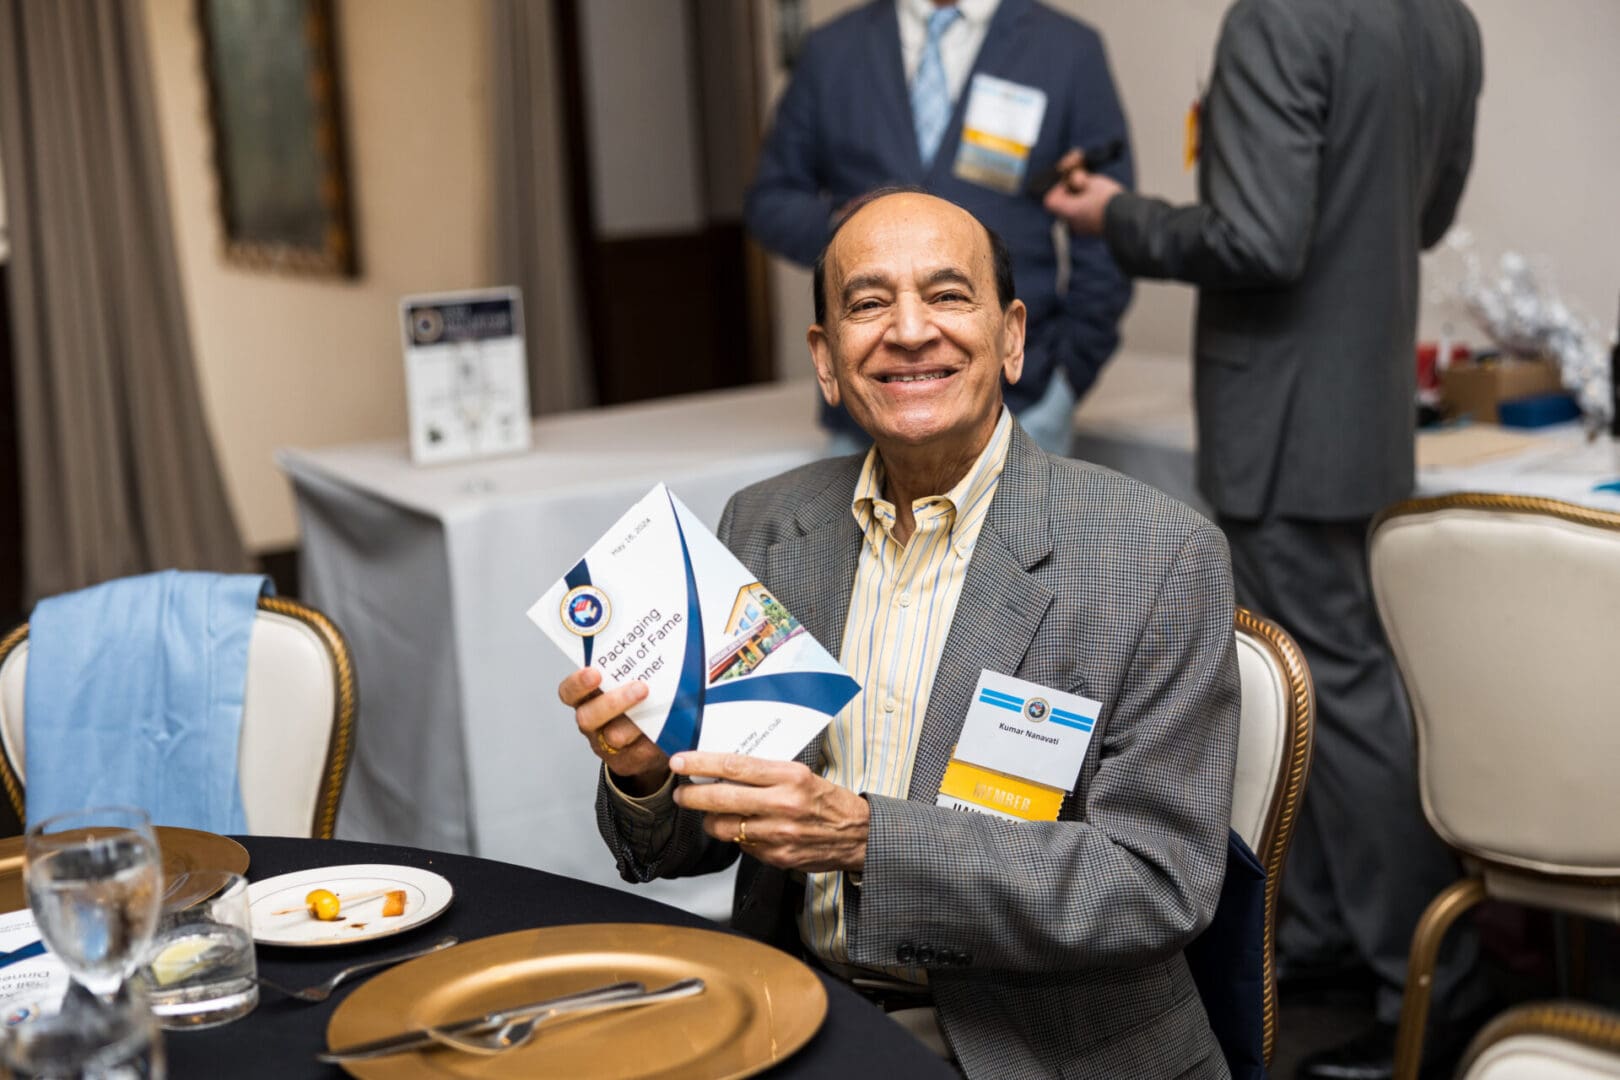 A smiling man holds a Packaging Hall of Fame booklet.